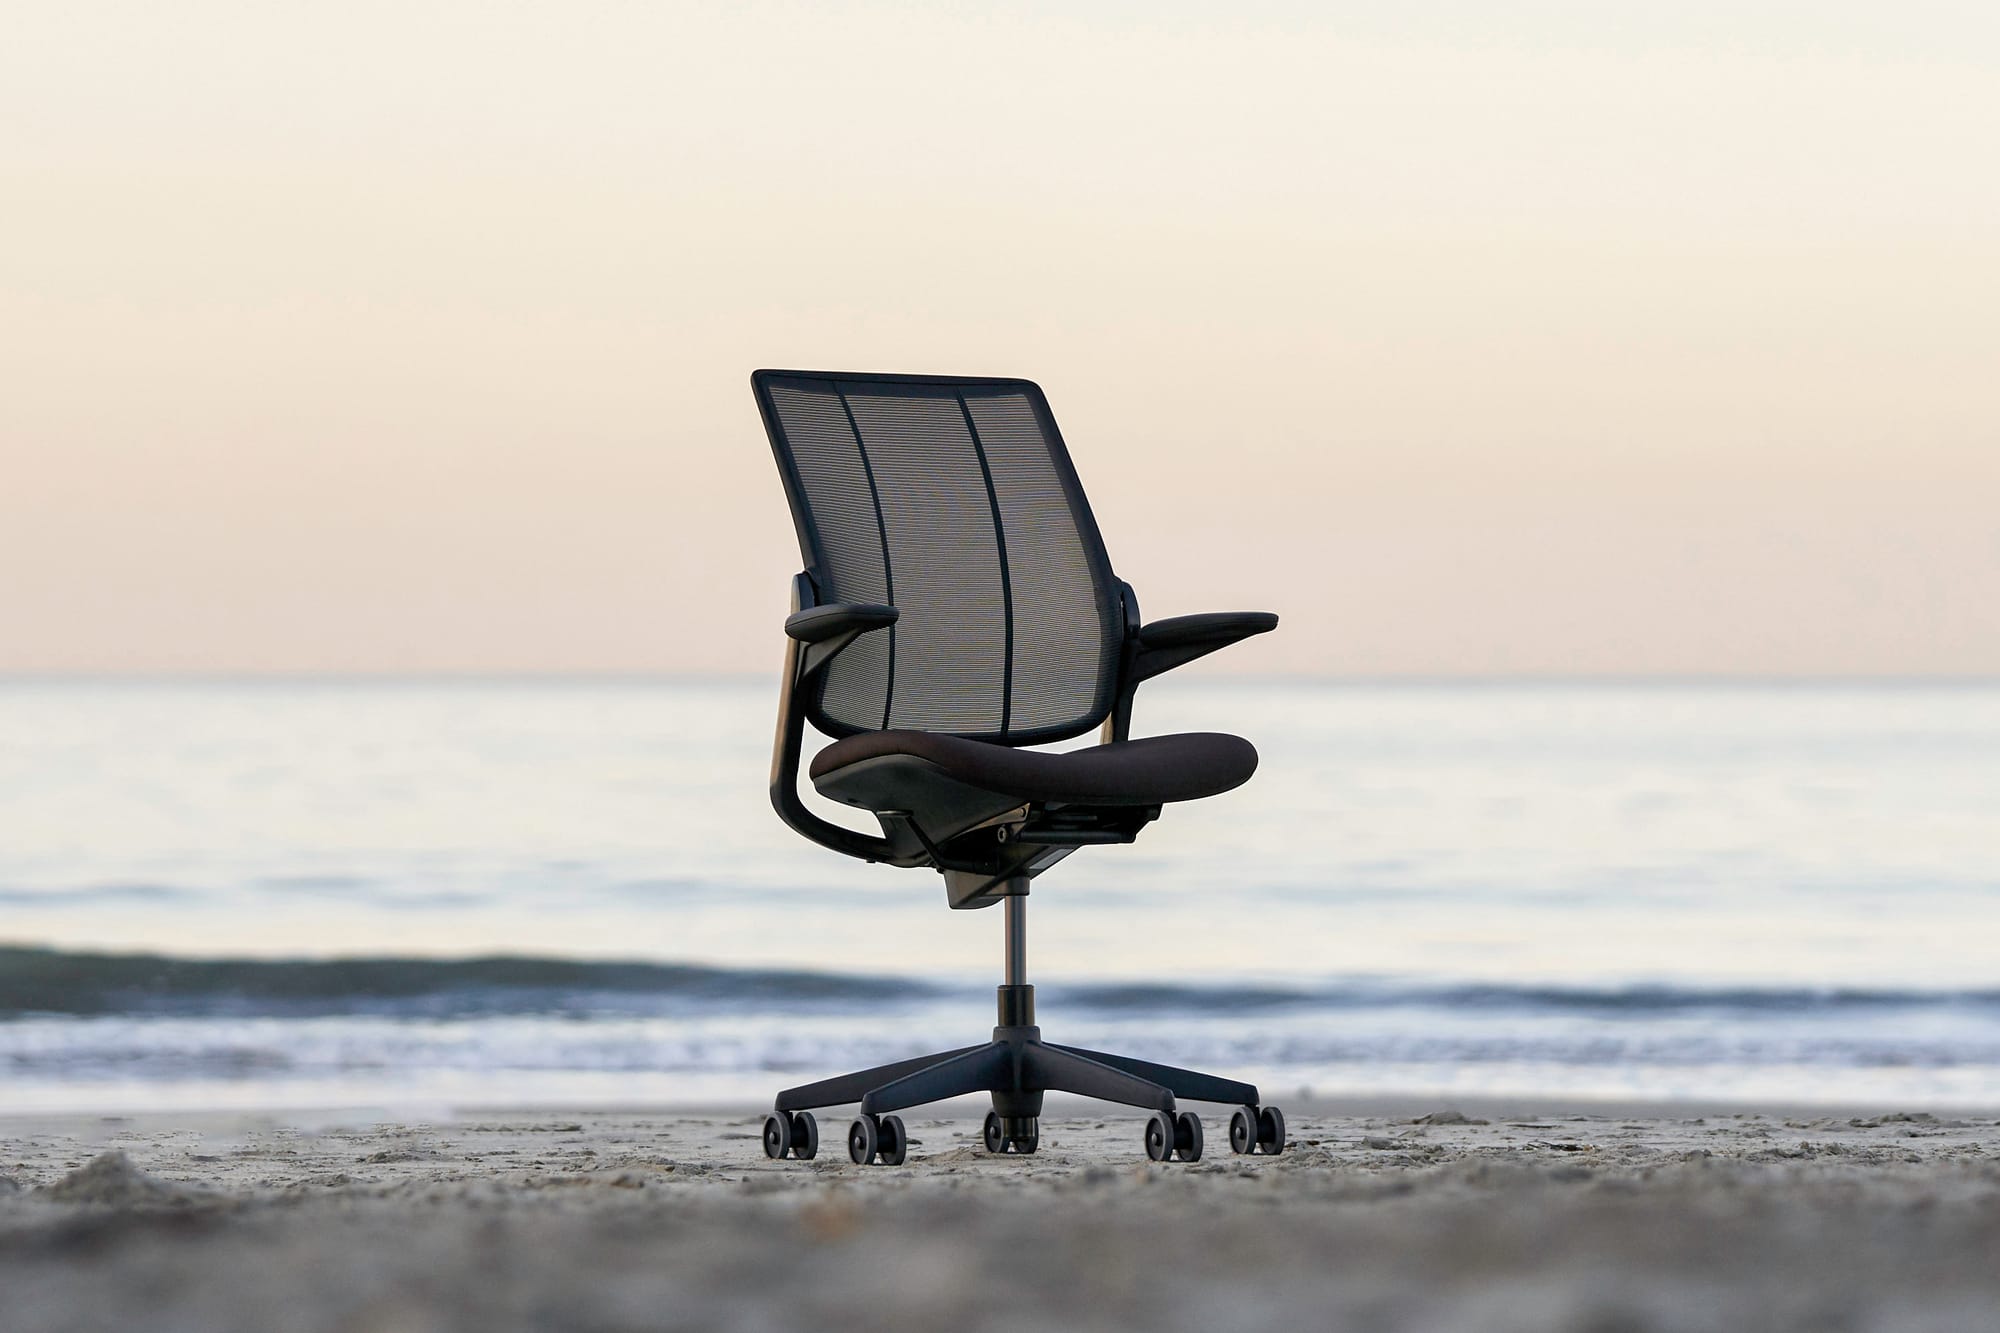 Photo of desk chair on the beach in front of a calm ocean